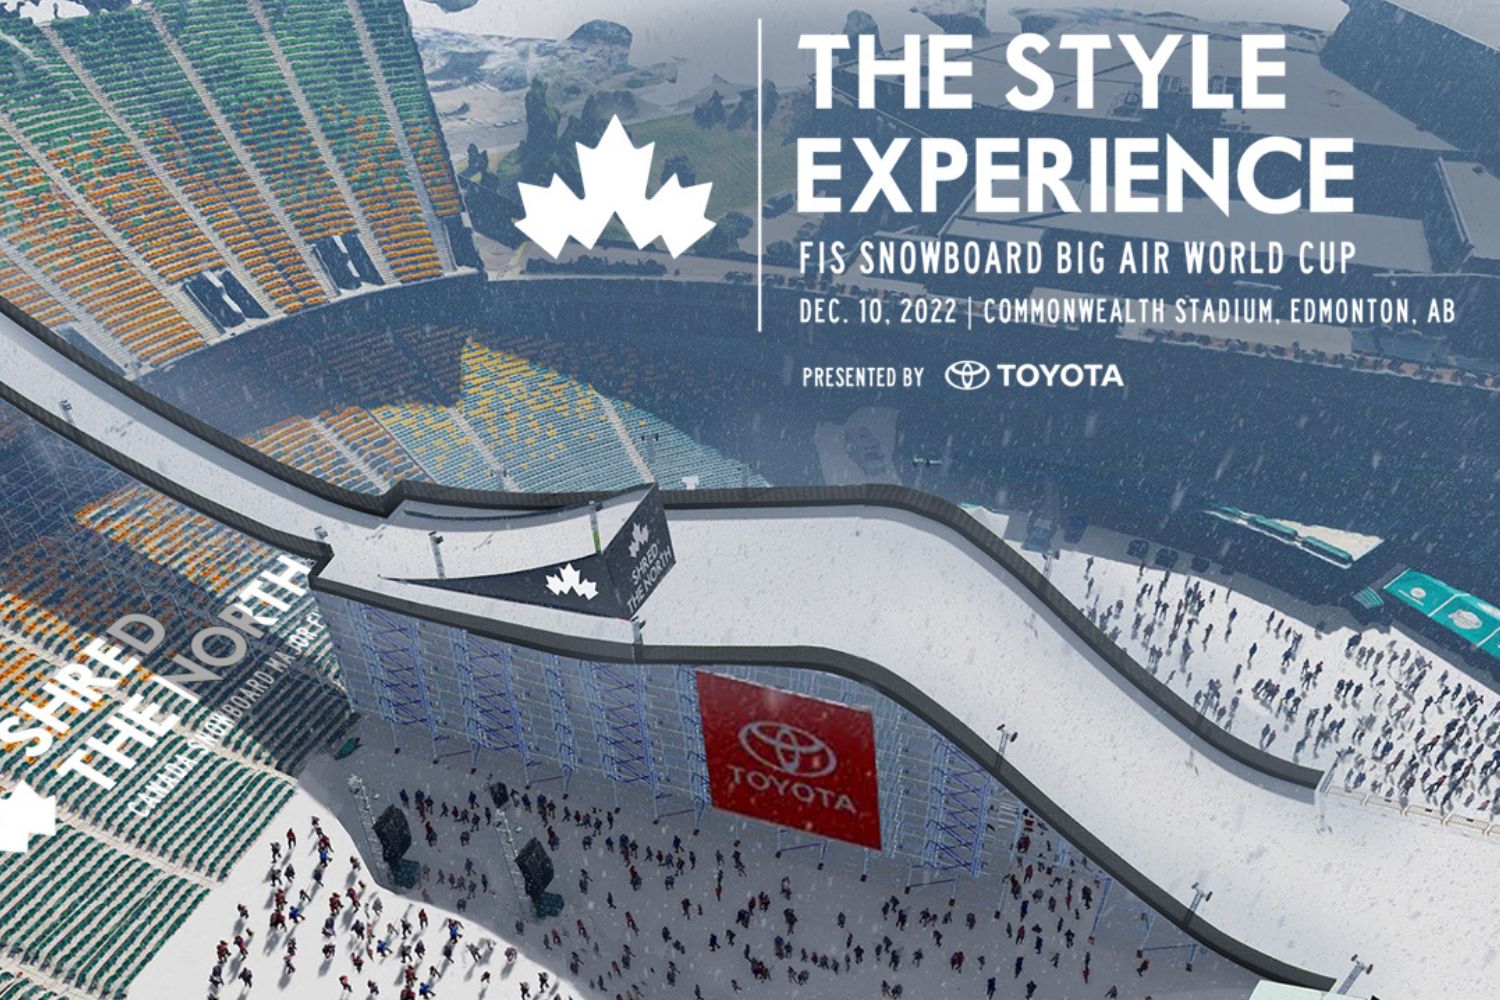 THE STYLE EXPERIENCE: FIS SNOWBOARD BIG AIR WORLD CUP